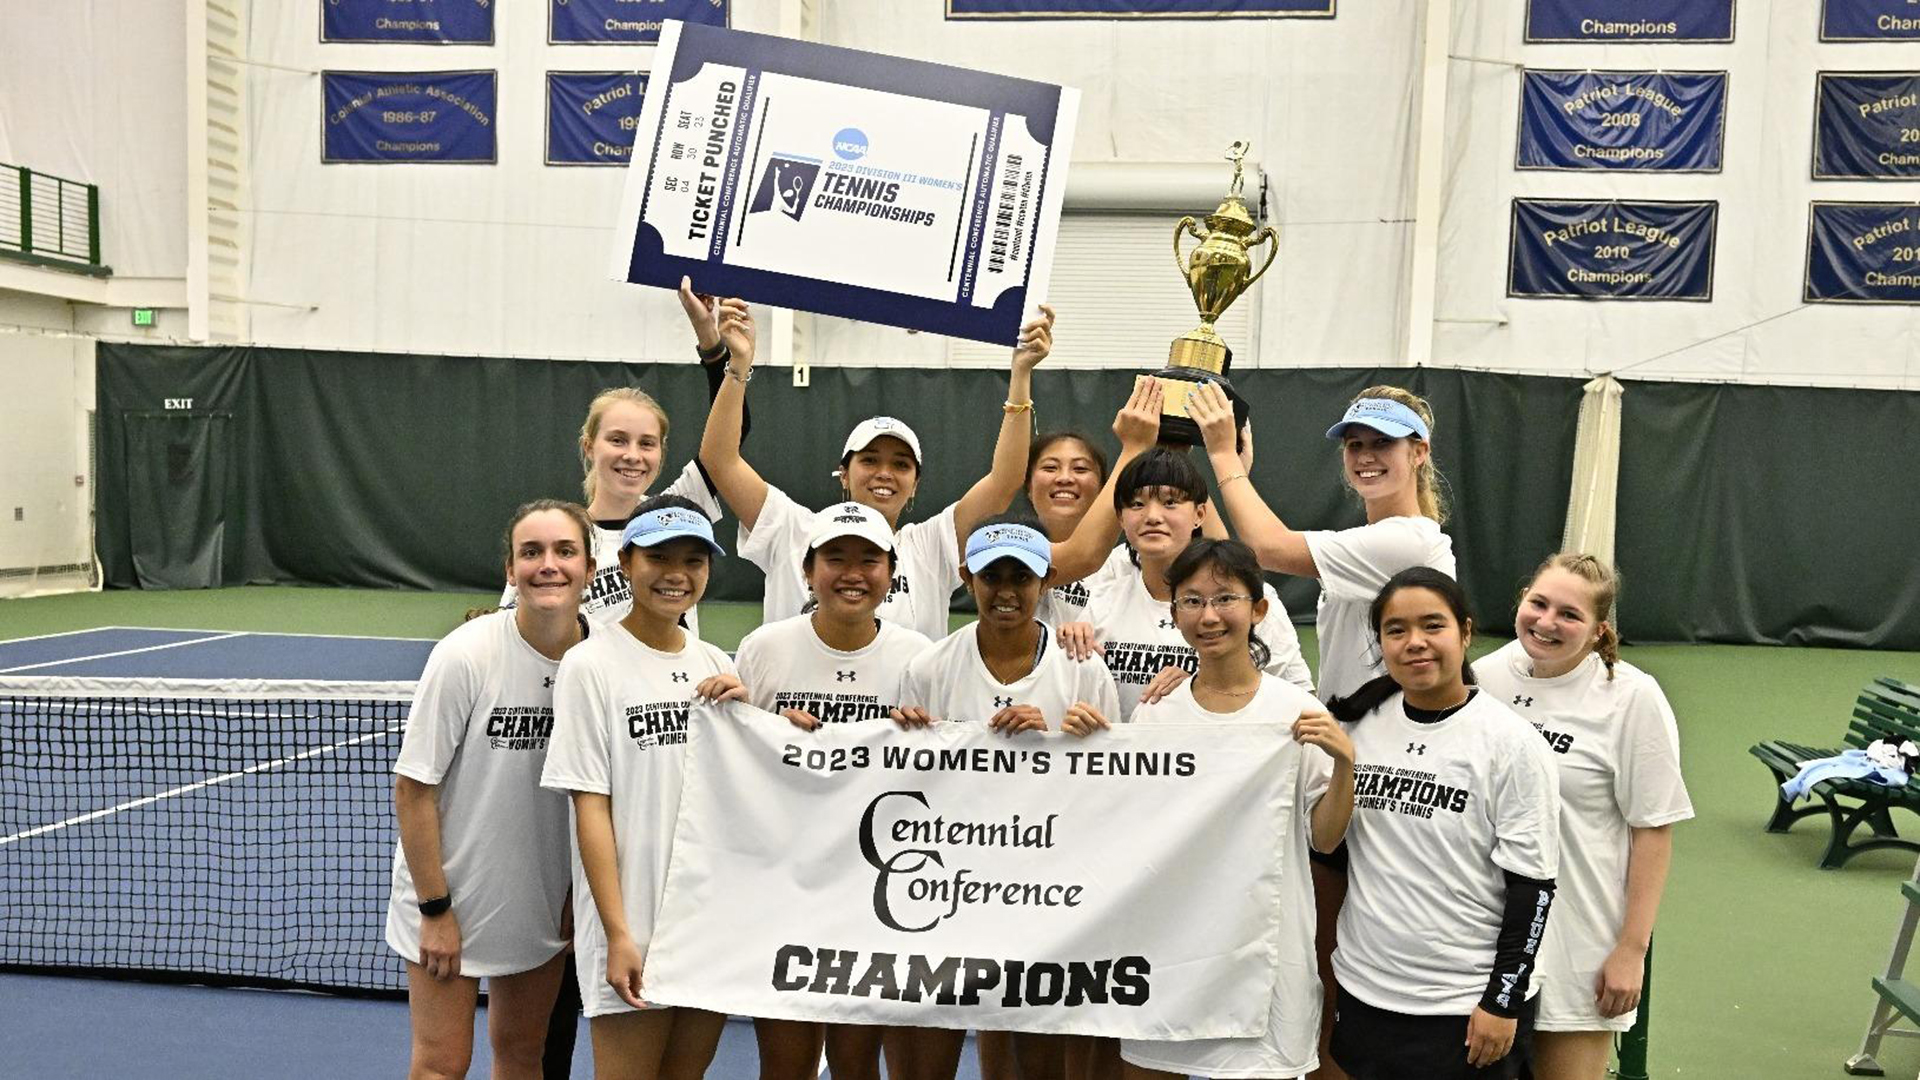 Hopkins Defeats Swarthmore 5-1 for 16th CC Championship